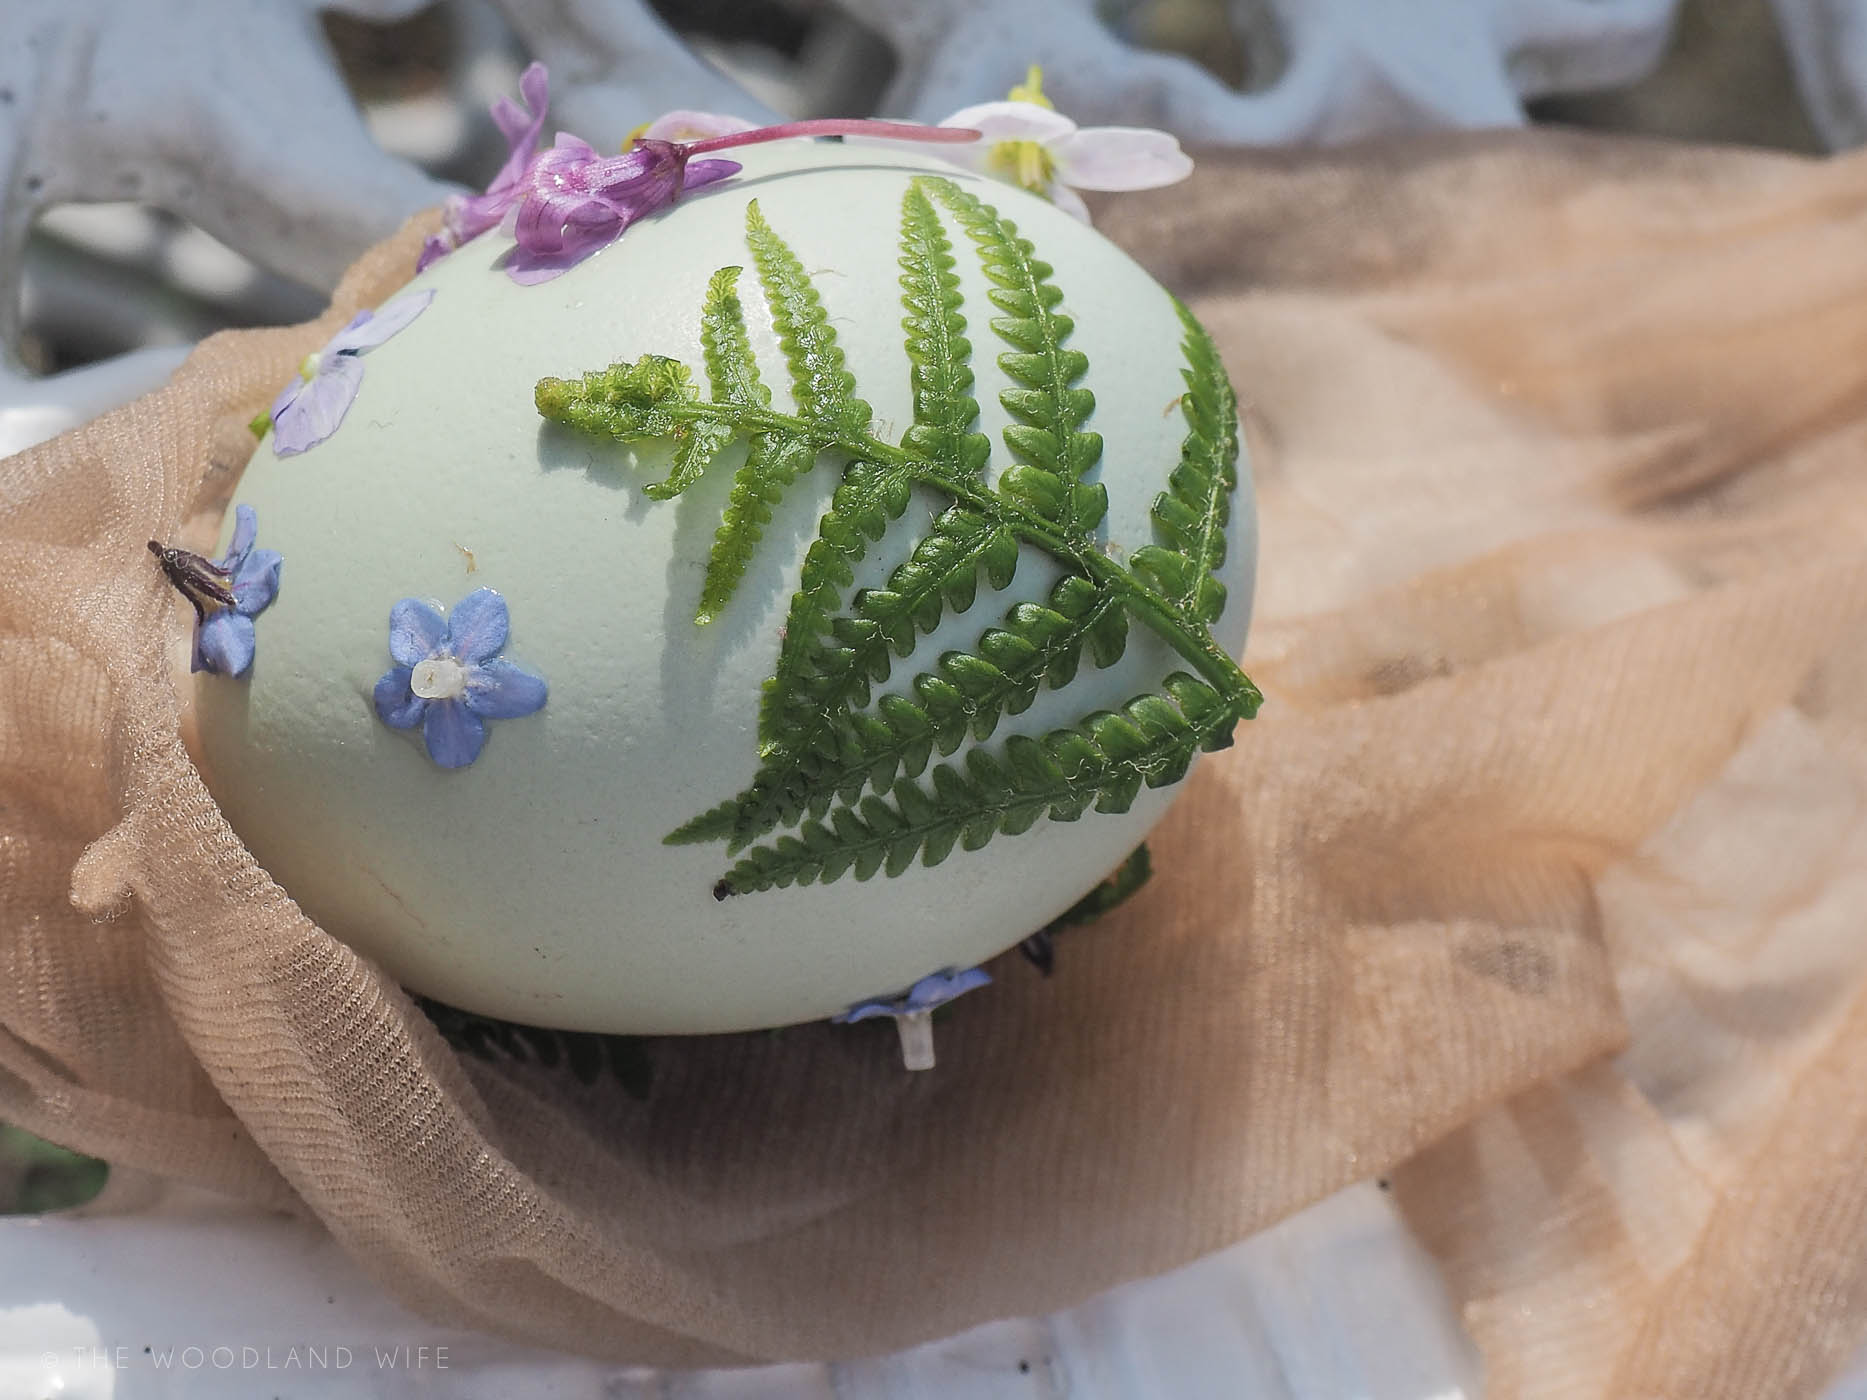 The Woodland Wife - Easter Crafting - Naturally Dyed Eggs with Onion Skins